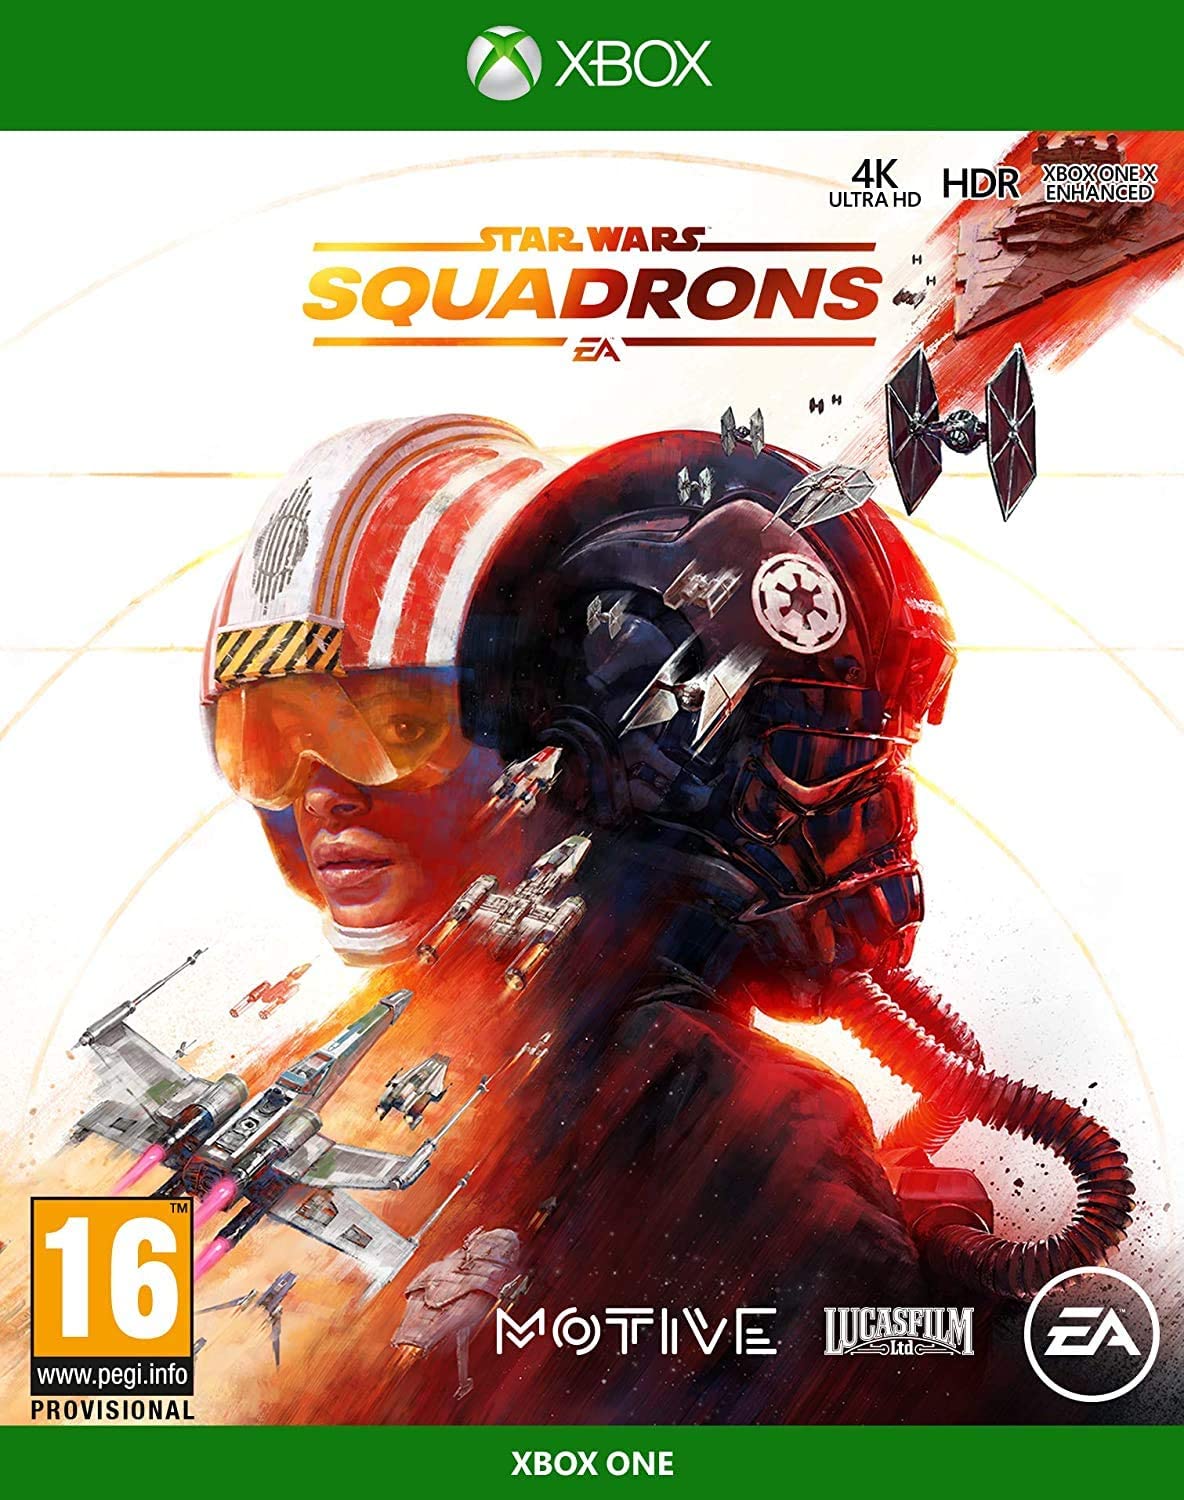 STAR WARS: Squadrons Xbox one